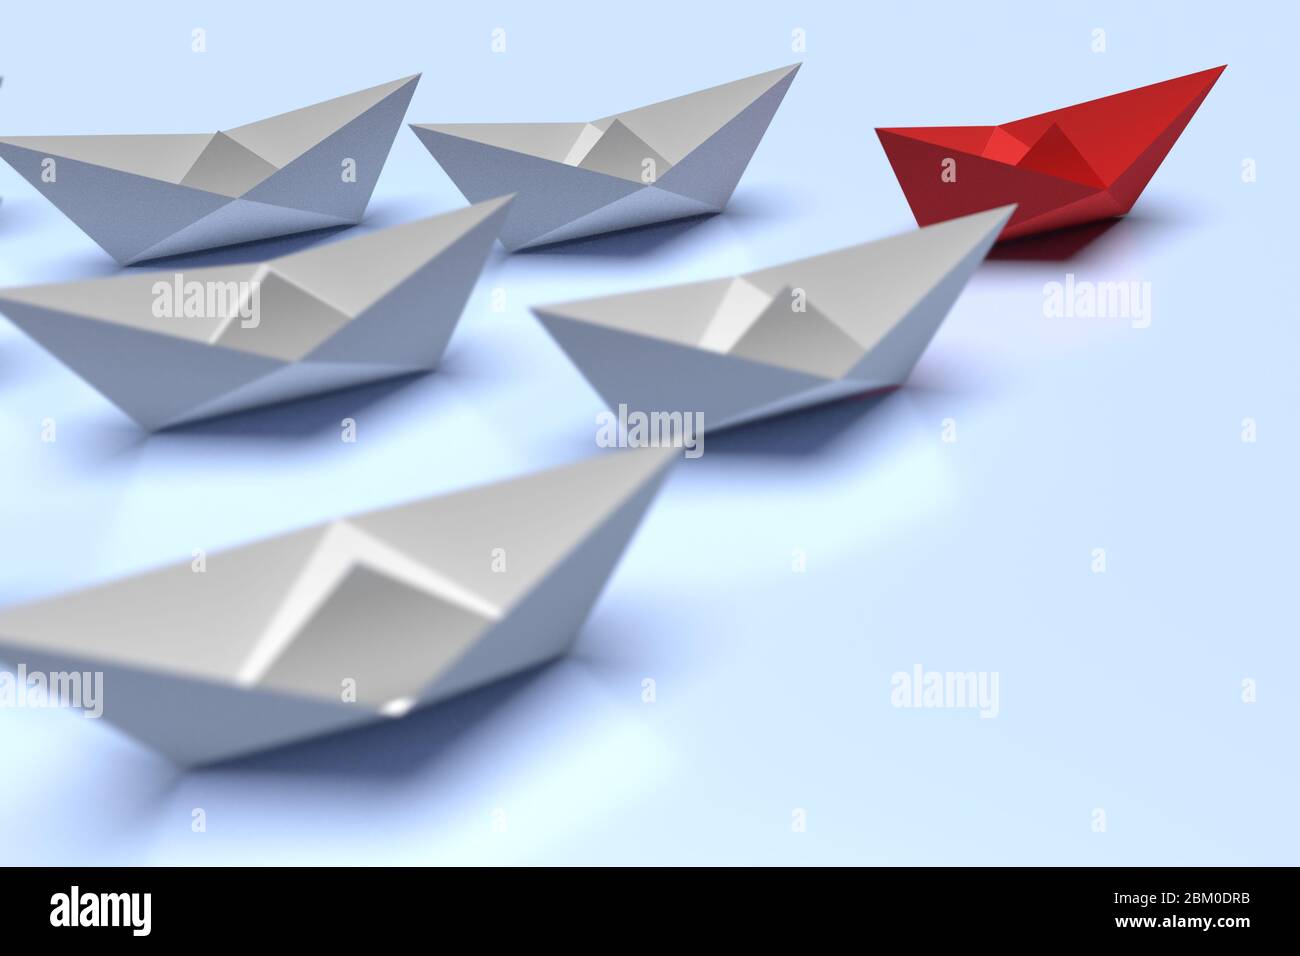 Leadership and business concept. One red leader ship leads other grey ships forward. 3d render Stock Photo